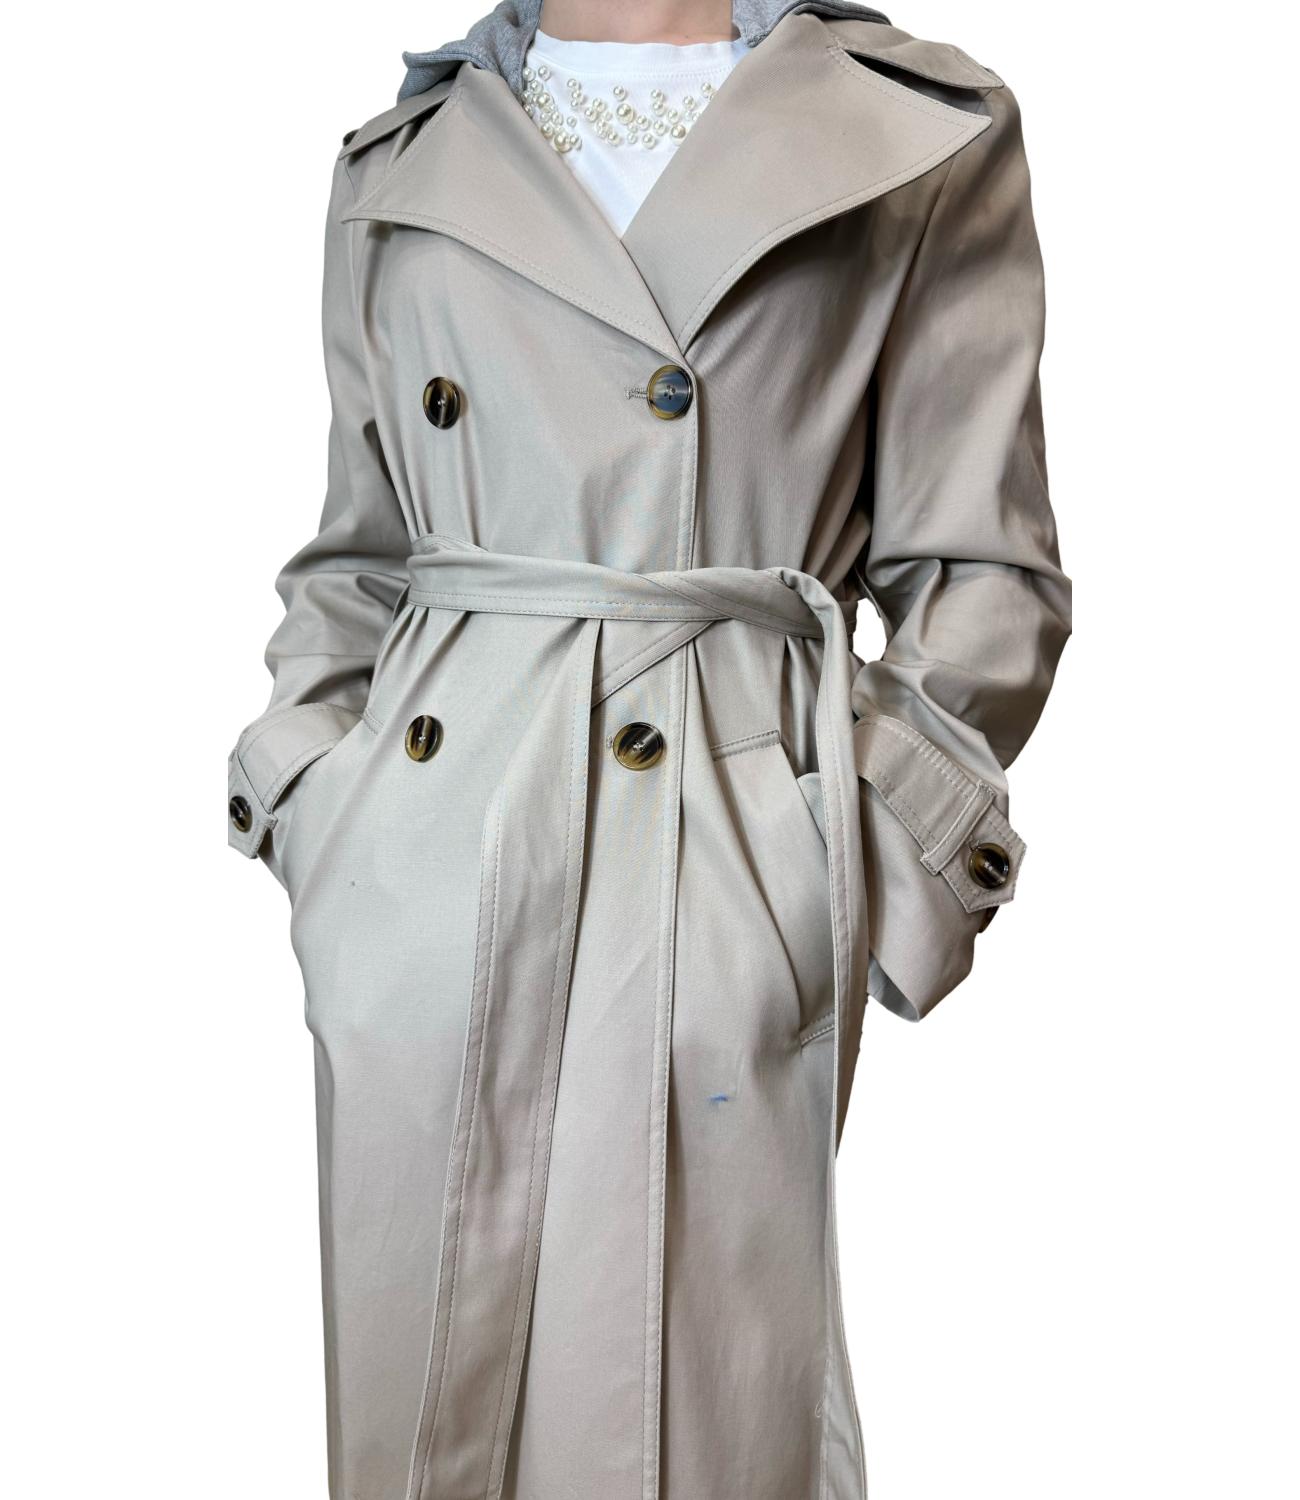 Impermeabile/trench beige donna